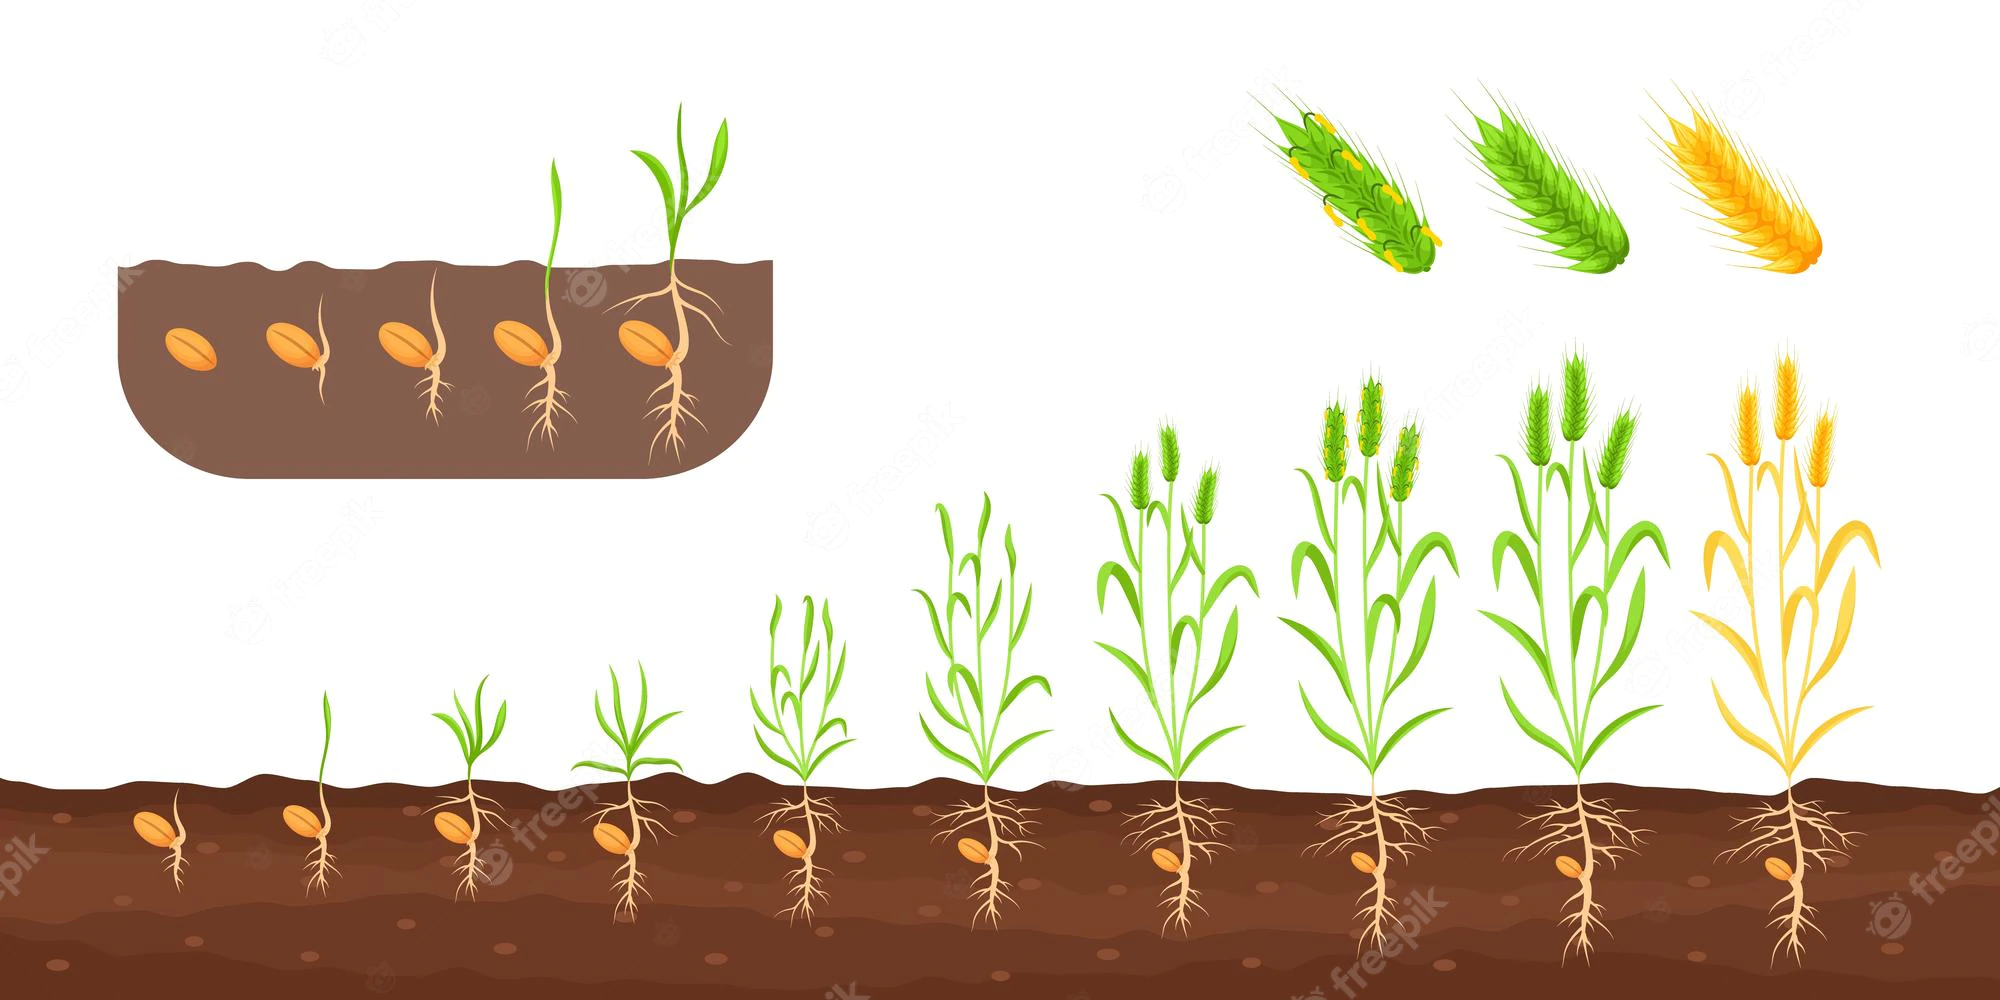 Boost Your Seed Germination Rate with Coir Fiber: A Step-by-Step Guide